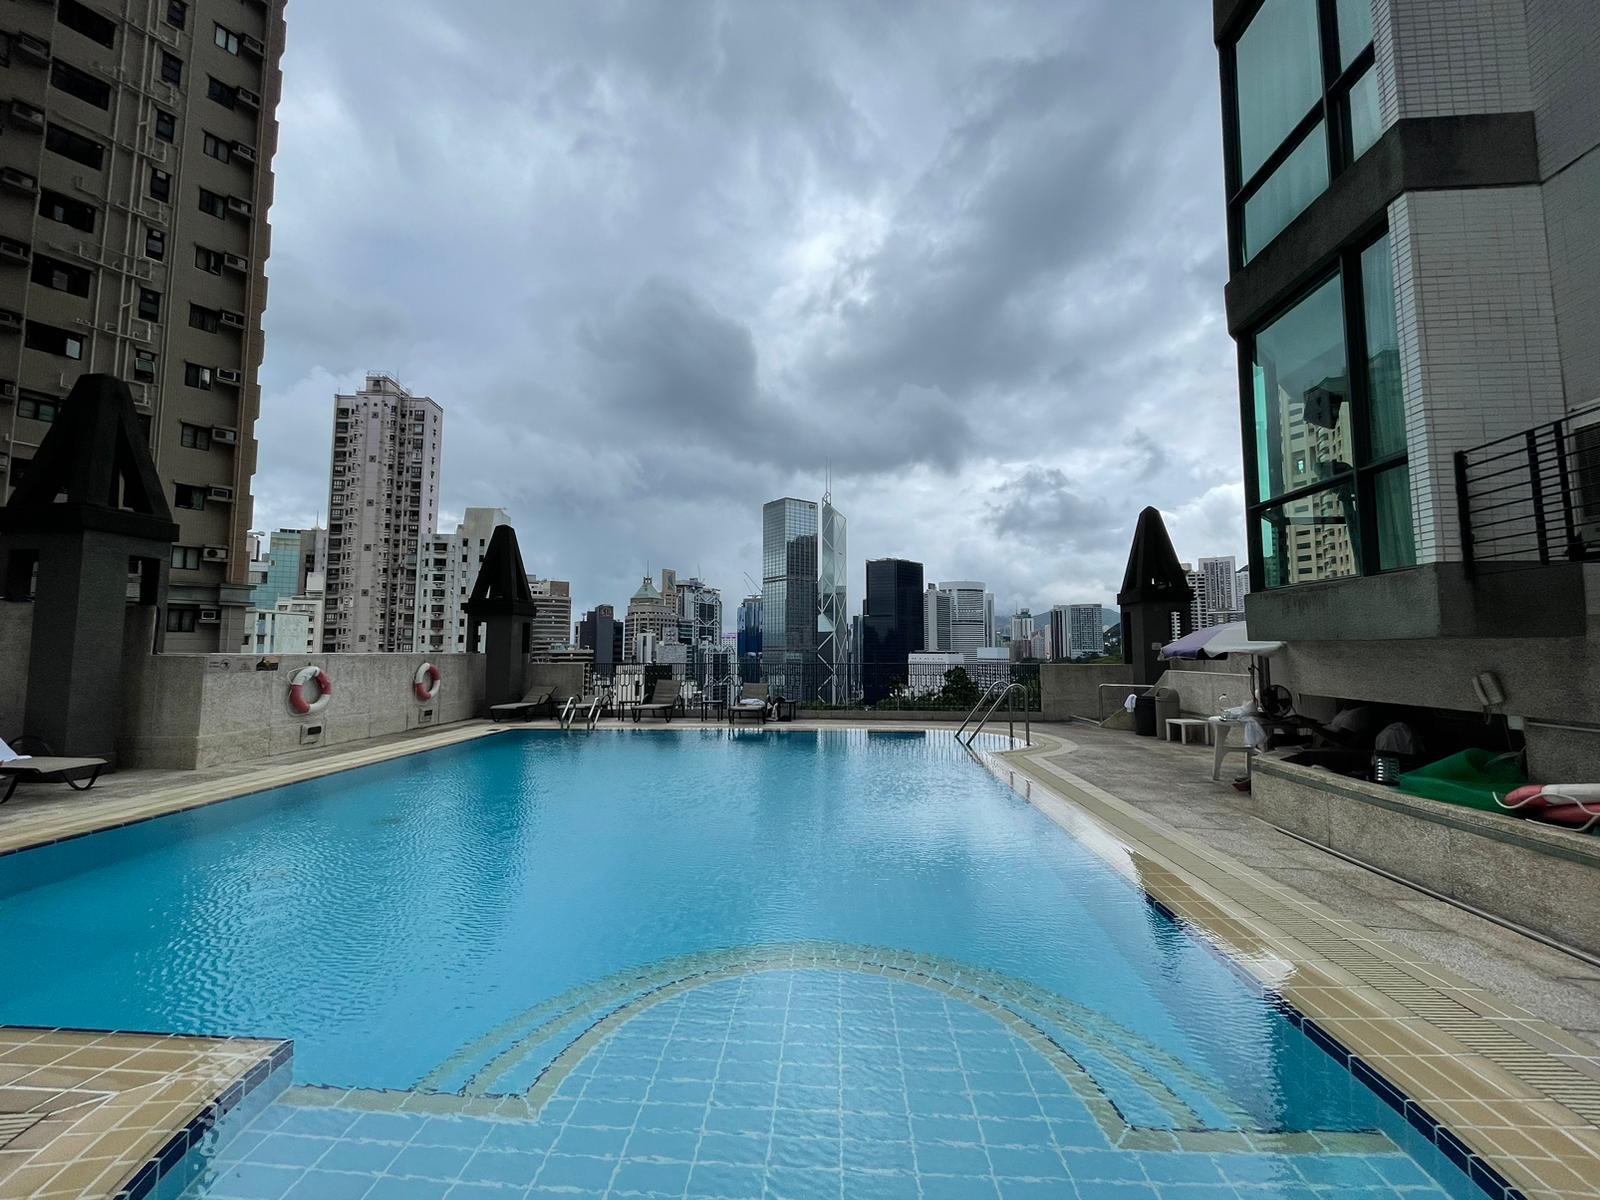 Bishop Lei International house outdoor pool with Hong Kong skyline view